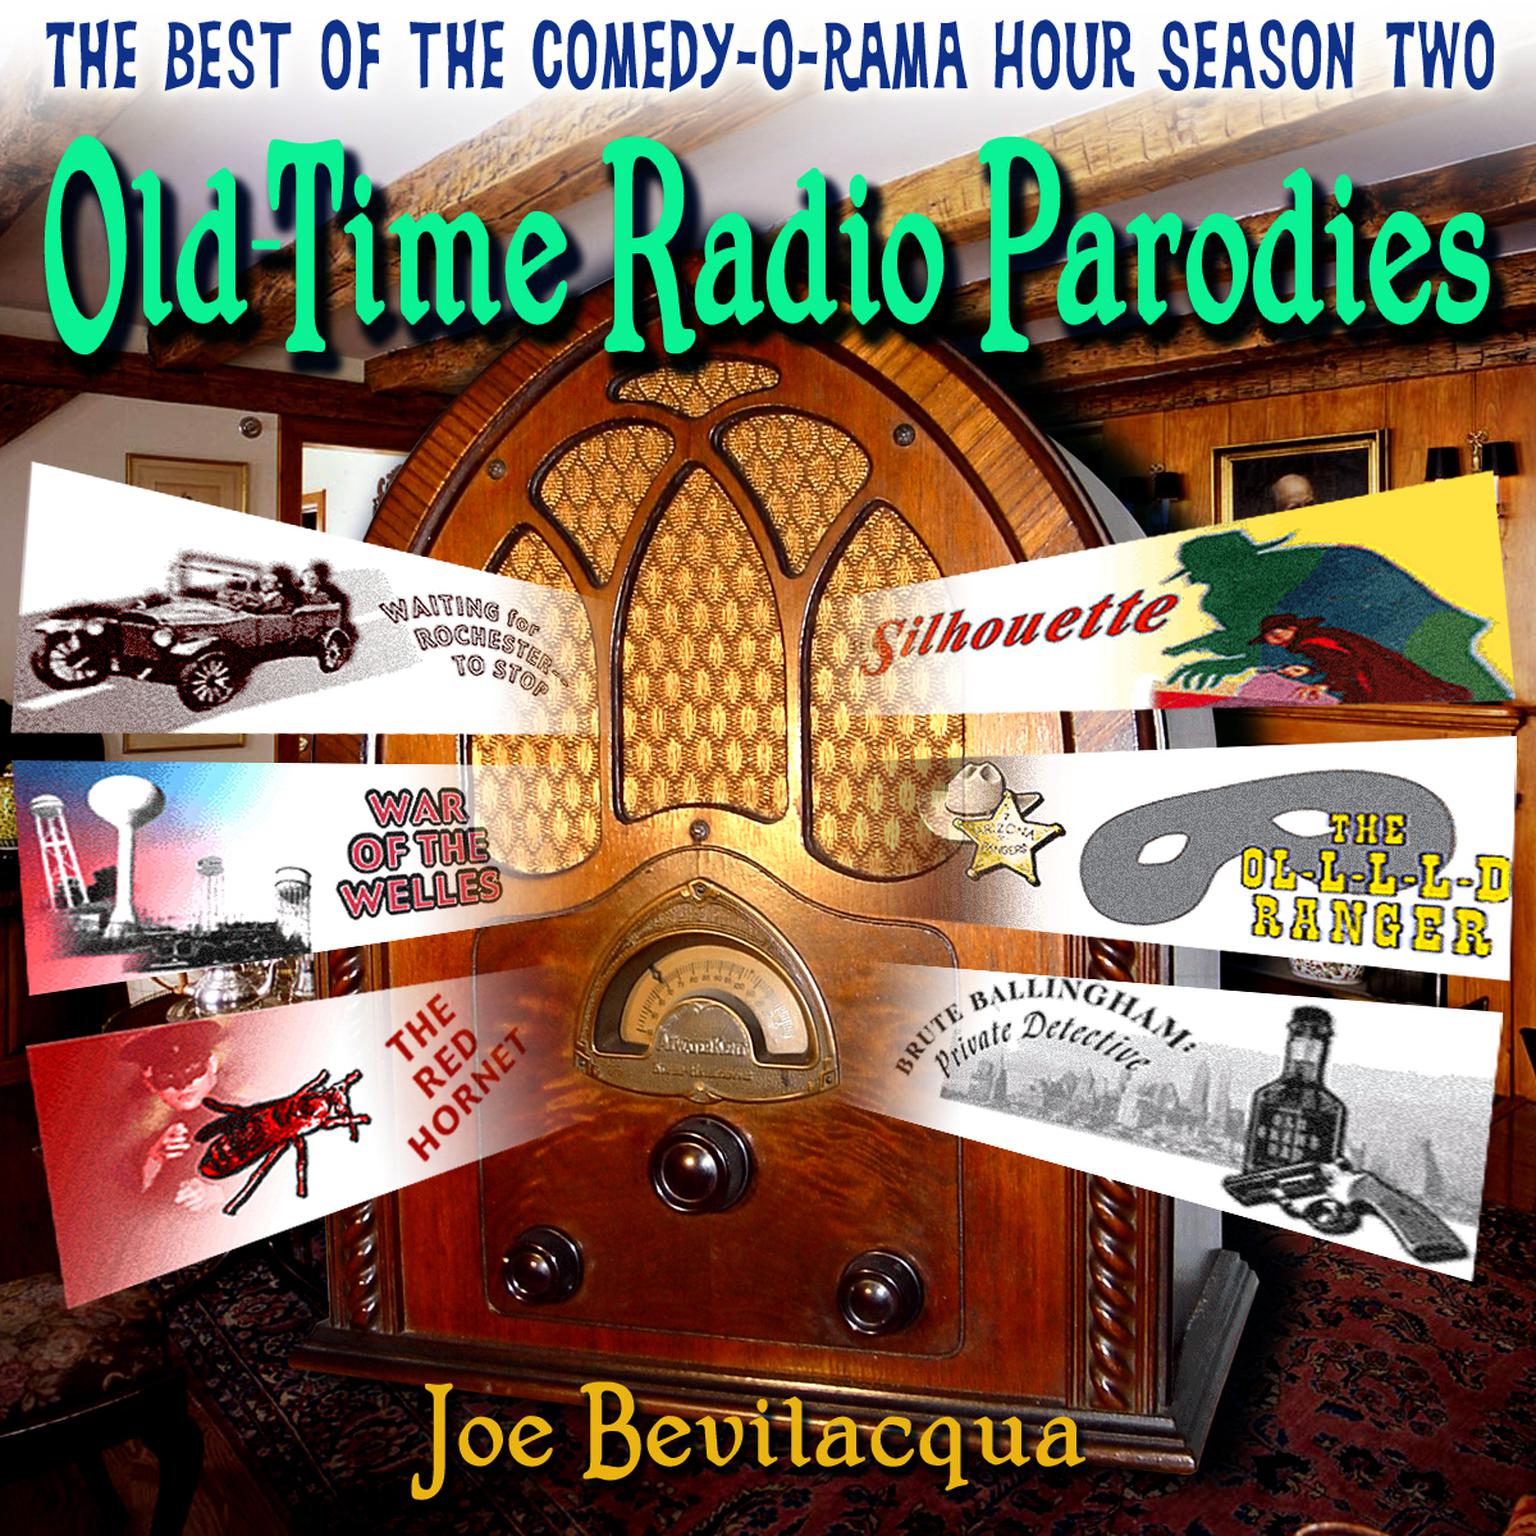 Old-Time Radio Parodies: The Best of the Comedy-O-Rama Hour Season Two Audiobook, by Joe Bevilacqua